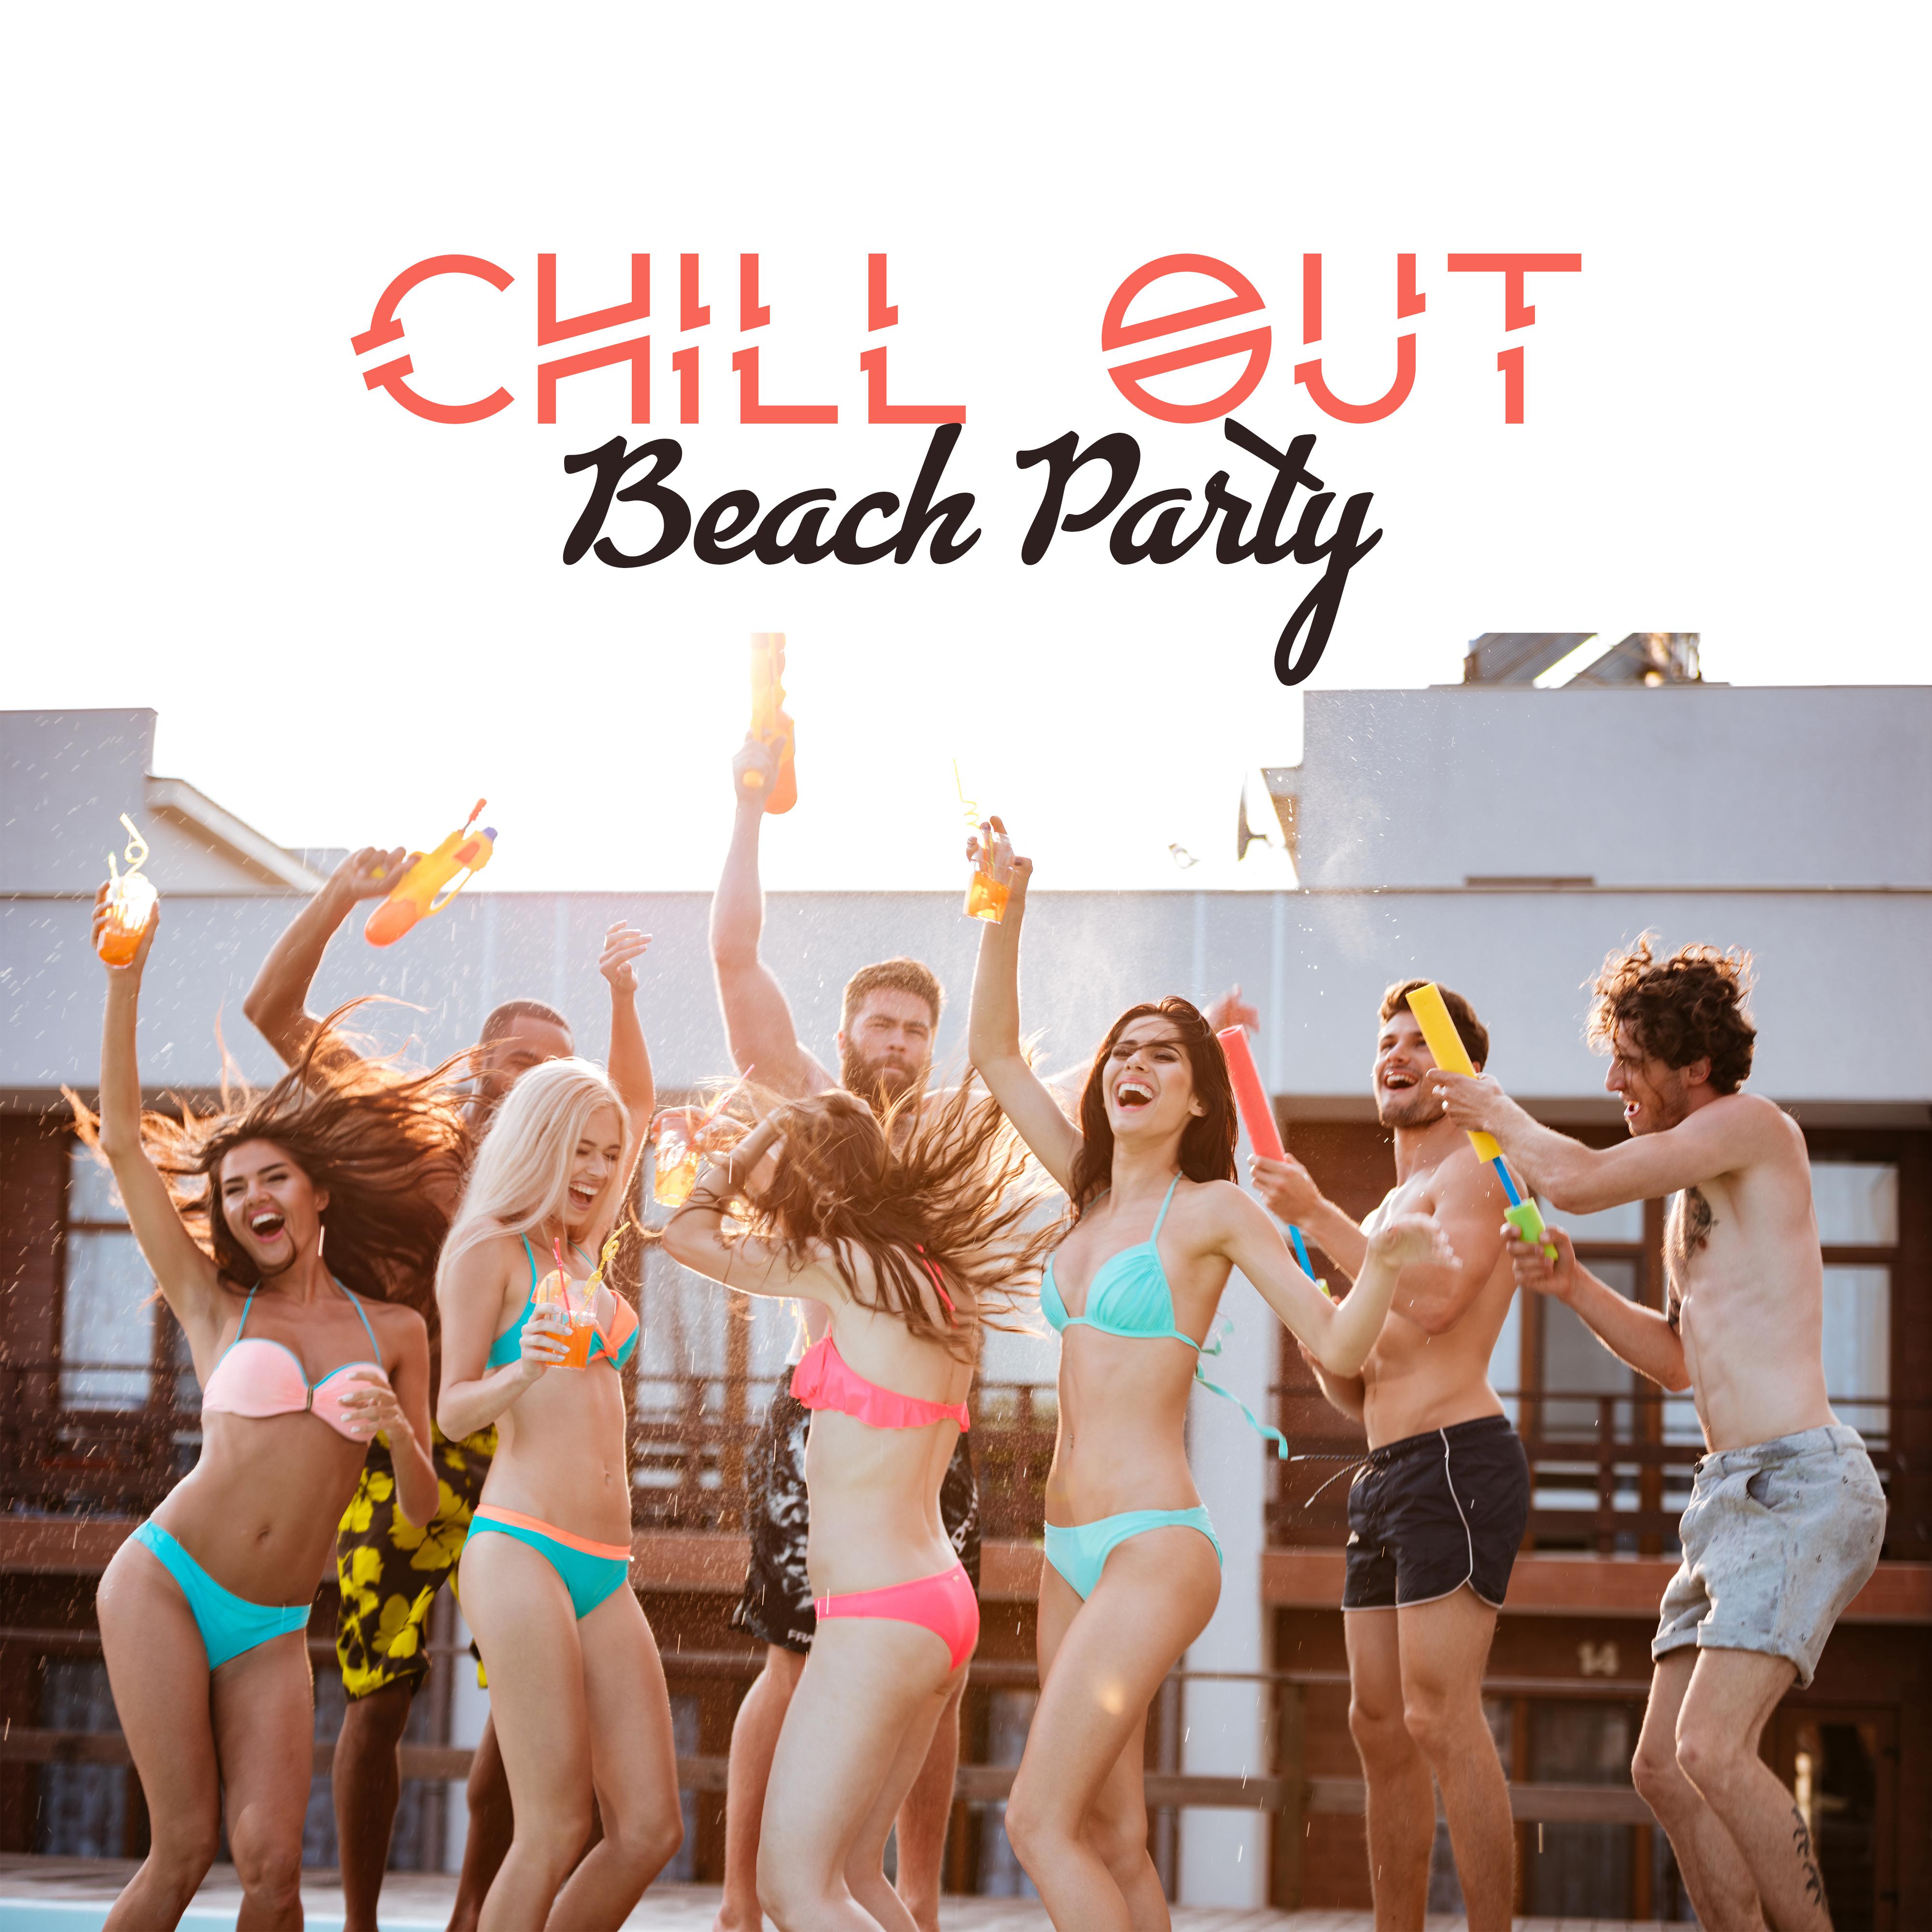 Chill Out Beach Party – Ibiza Dance Music, Electronic Chill Out, Summer Hits, Cocktail Bar